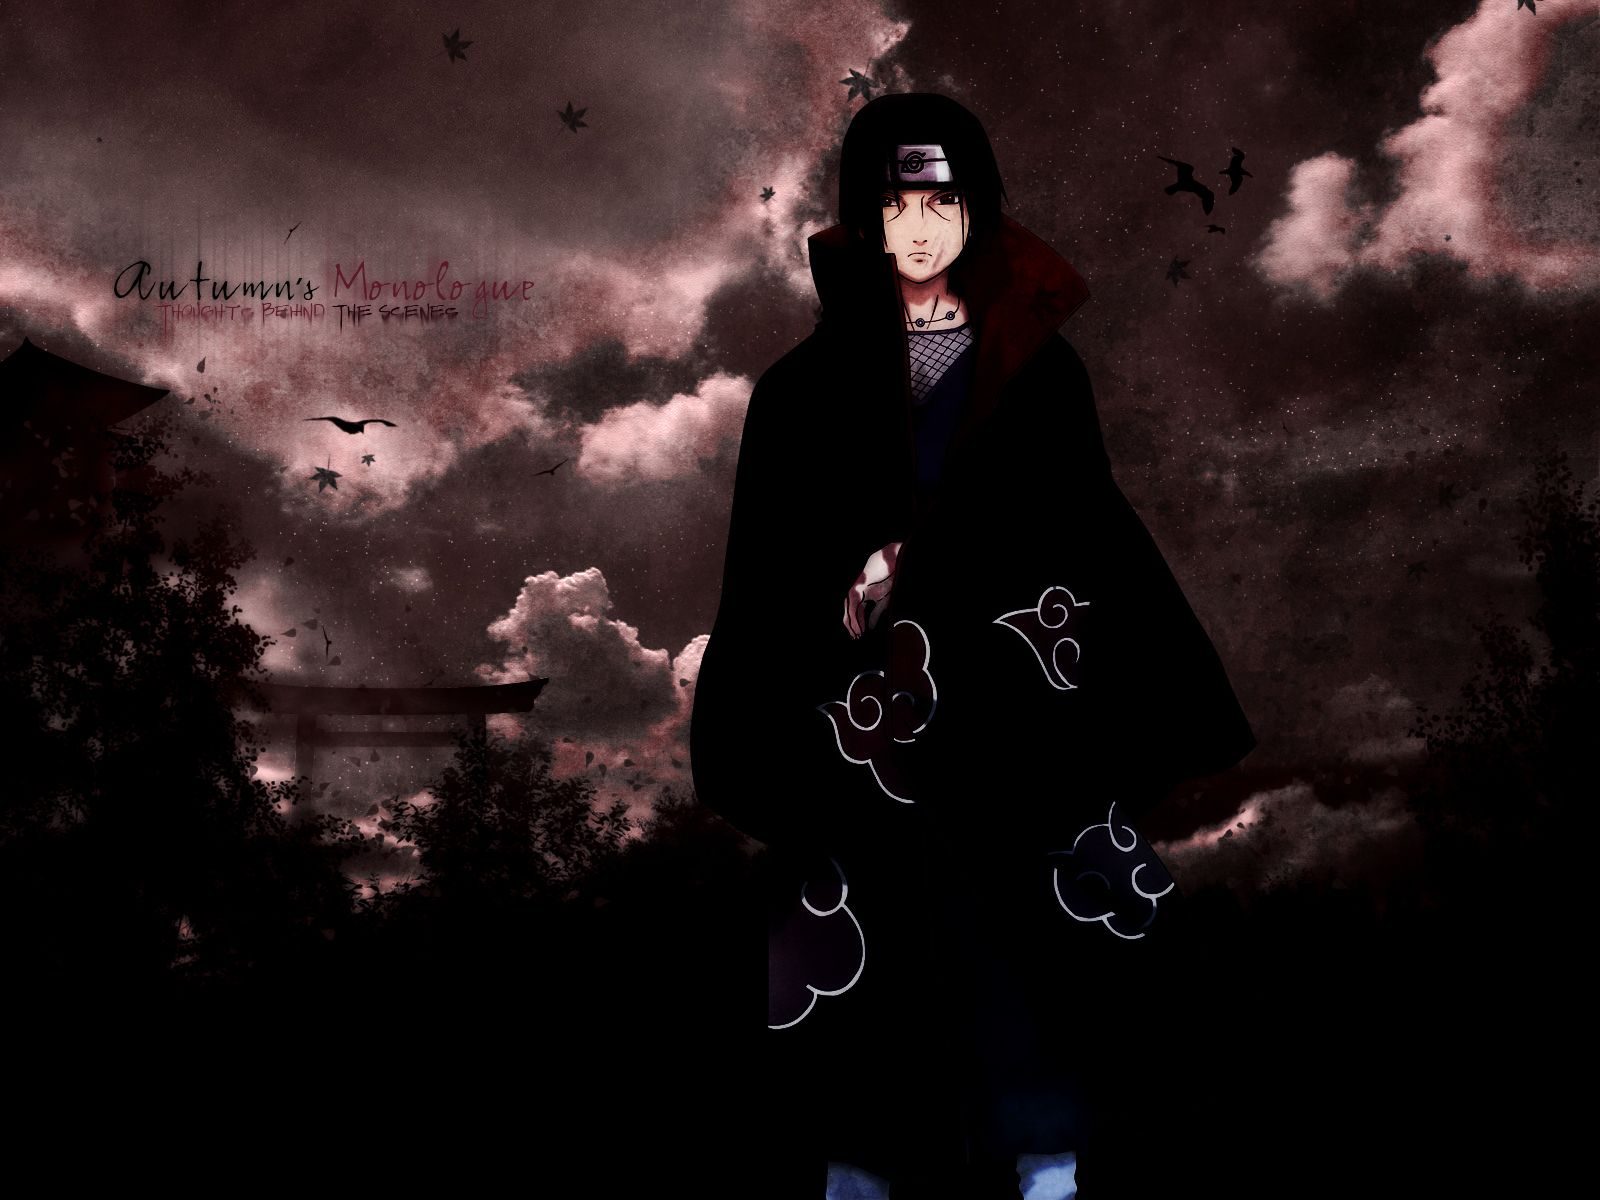 Naruto wallpaper with Itachi Uchiha, the genius of subtlety, on Wallpaper Cave. Get ready for some epic ninja vibes!